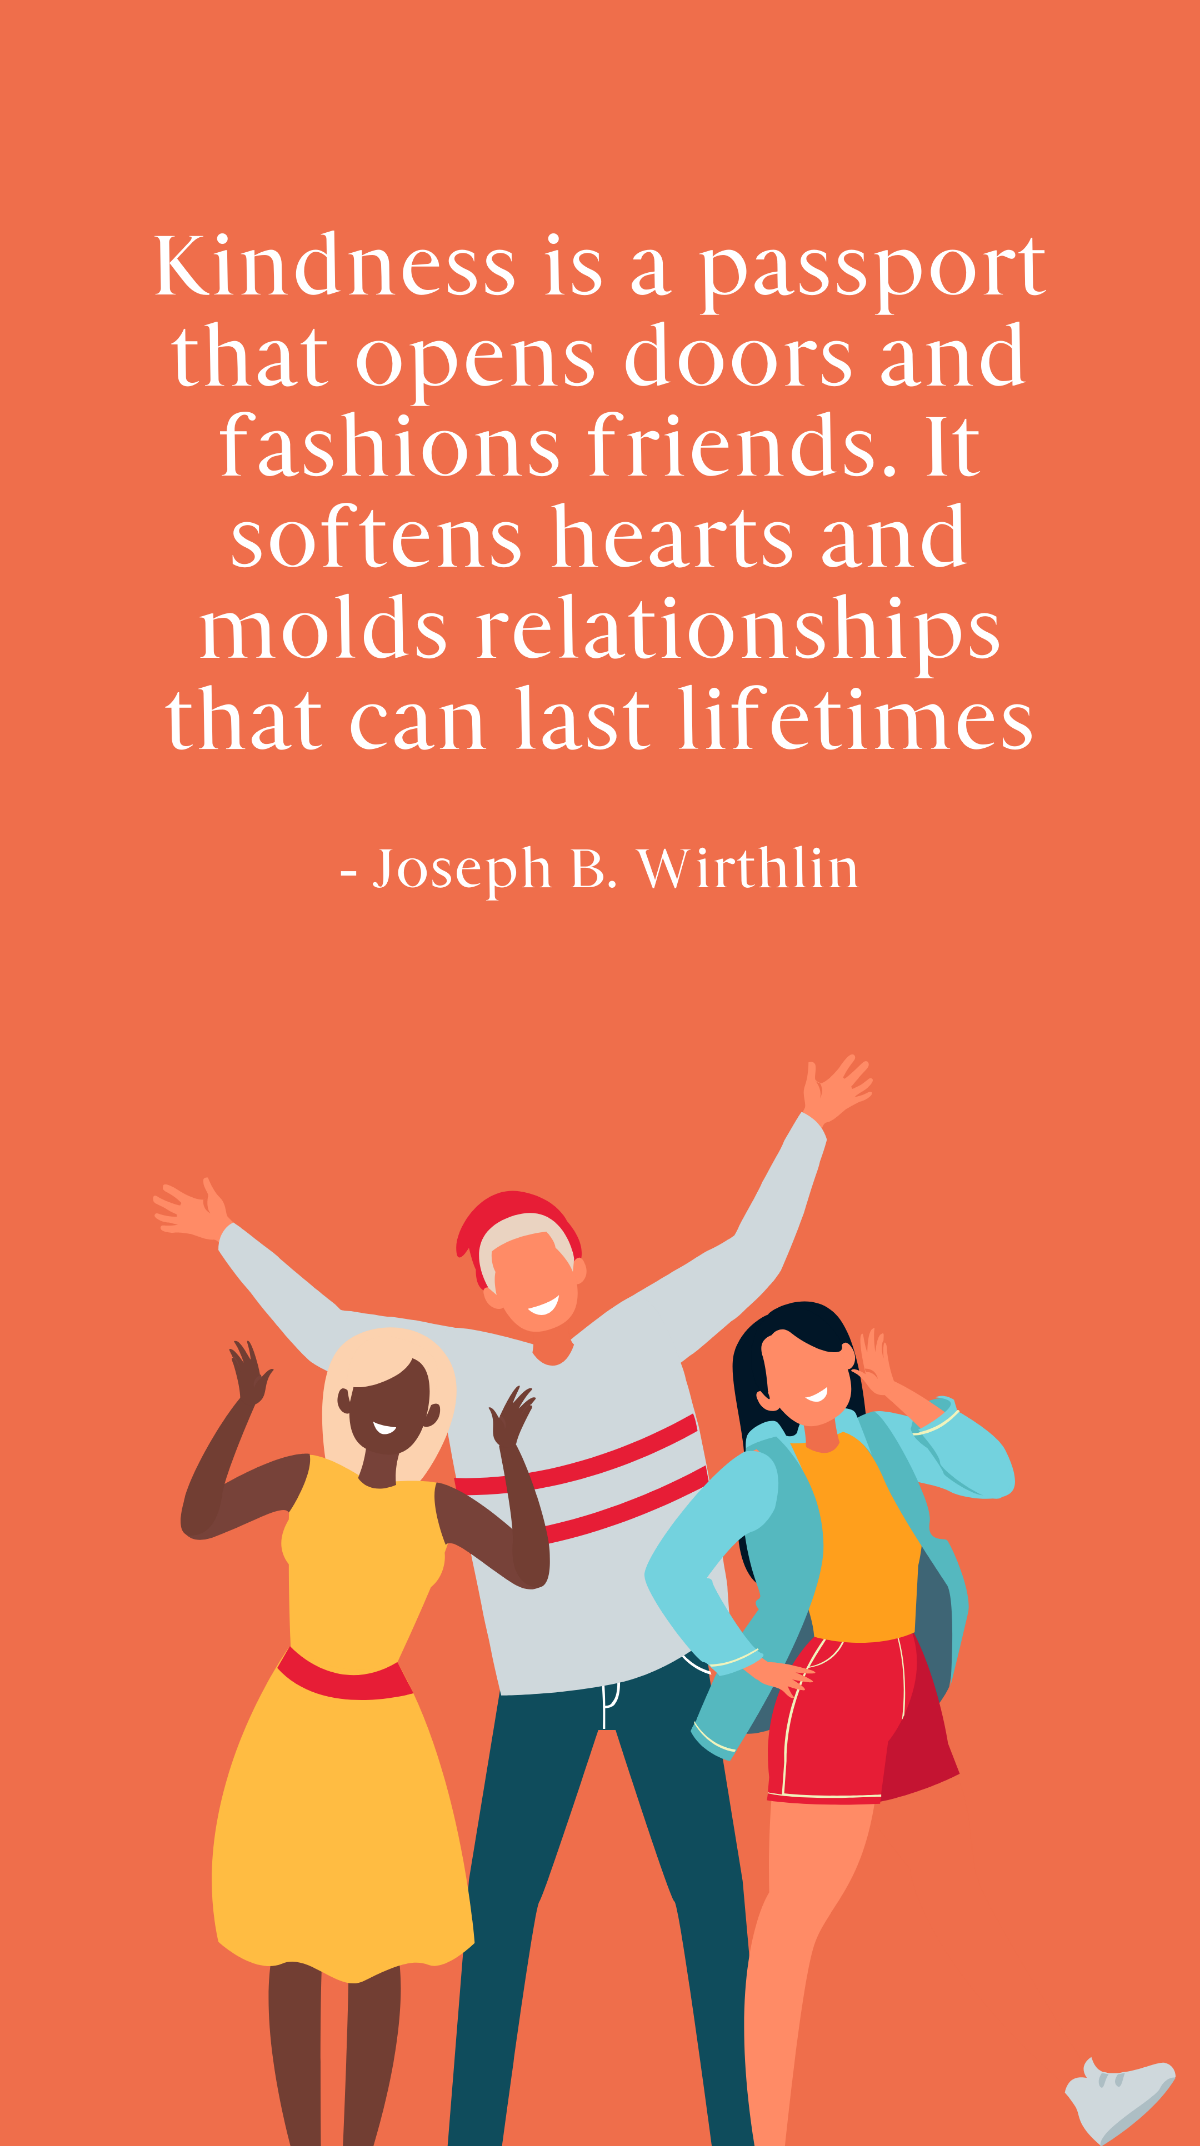 Joseph B. Wirthlin - Kindness is a passport that opens doors and fashions friends. It softens hearts and molds relationships that can last lifetimes Template